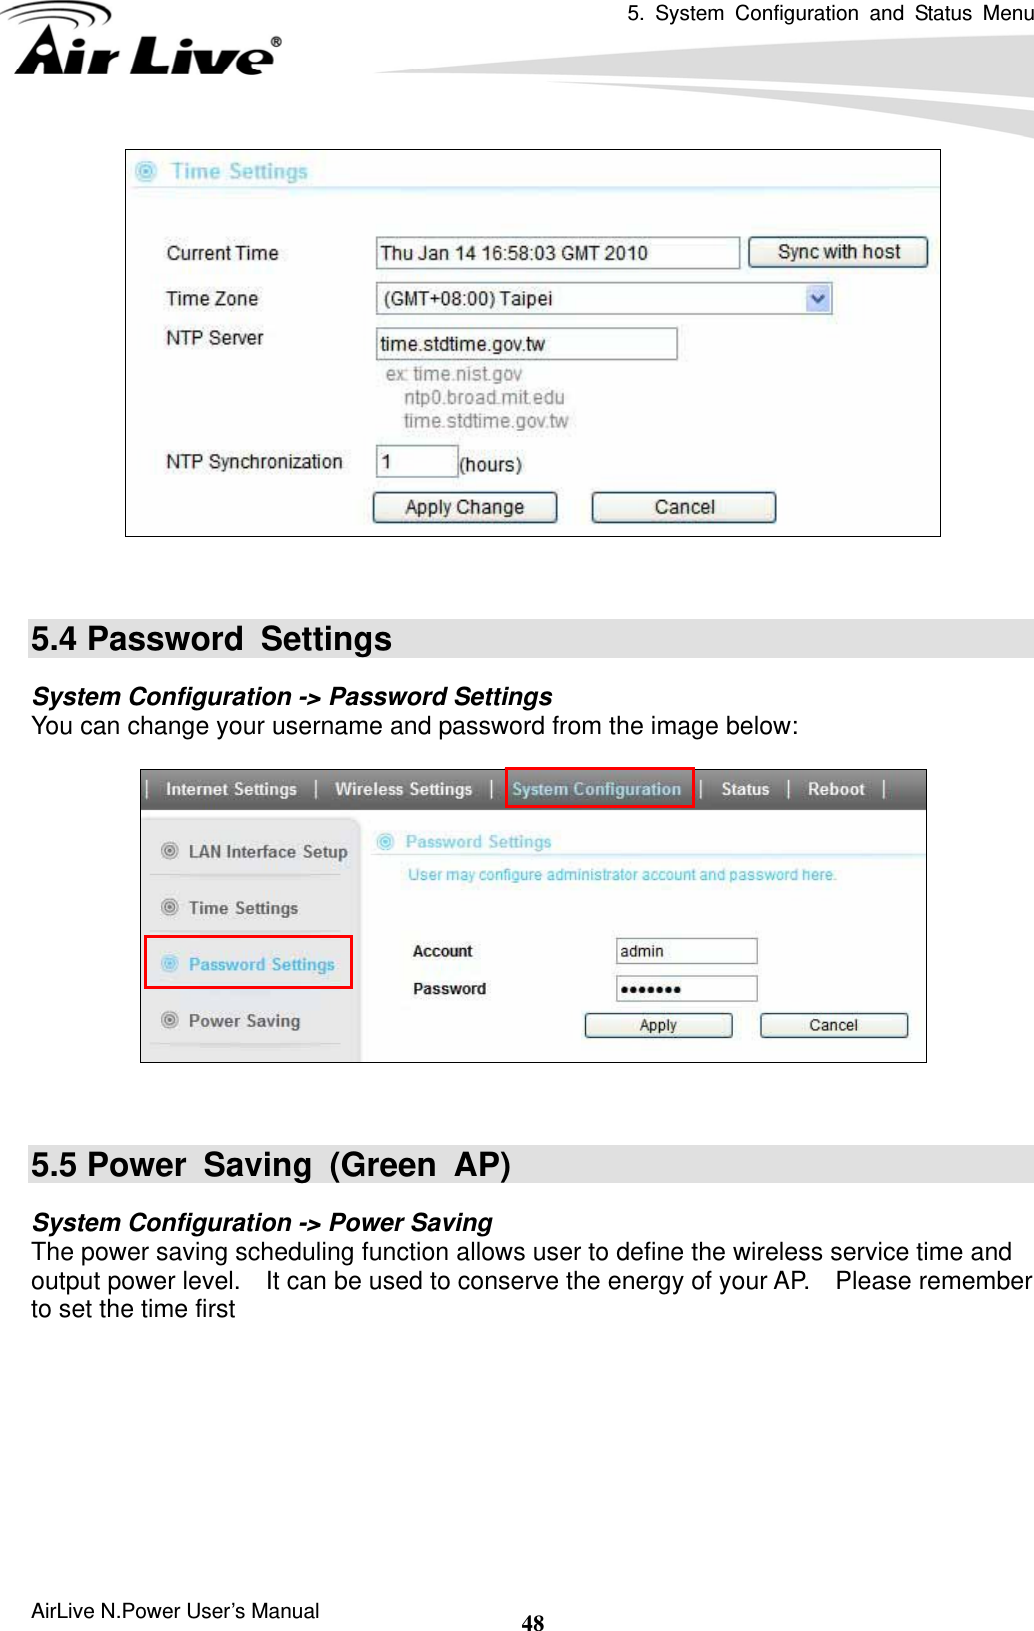 5. System Configuration and Status Menu  AirLive N.Power User’s Manual  48   5.4 Password  Settings System Configuration -&gt; Password Settings You can change your username and password from the image below:     5.5 Power Saving (Green AP) System Configuration -&gt; Power Saving The power saving scheduling function allows user to define the wireless service time and output power level.    It can be used to conserve the energy of your AP.    Please remember to set the time first   